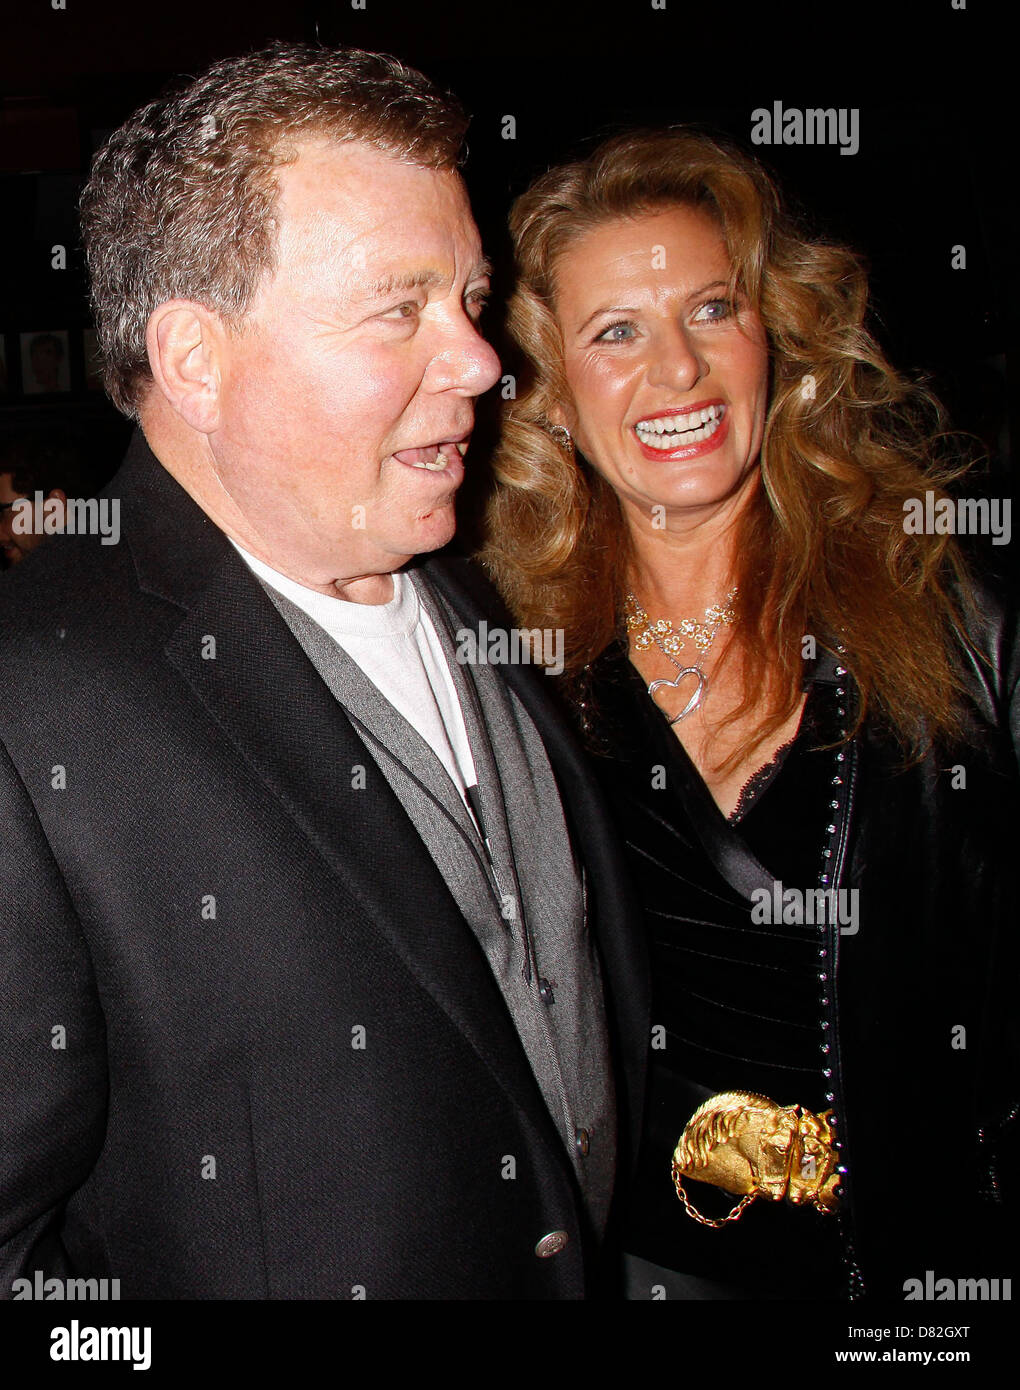 William Shatner and his wife Elizabeth Shatner Opening night afterparty